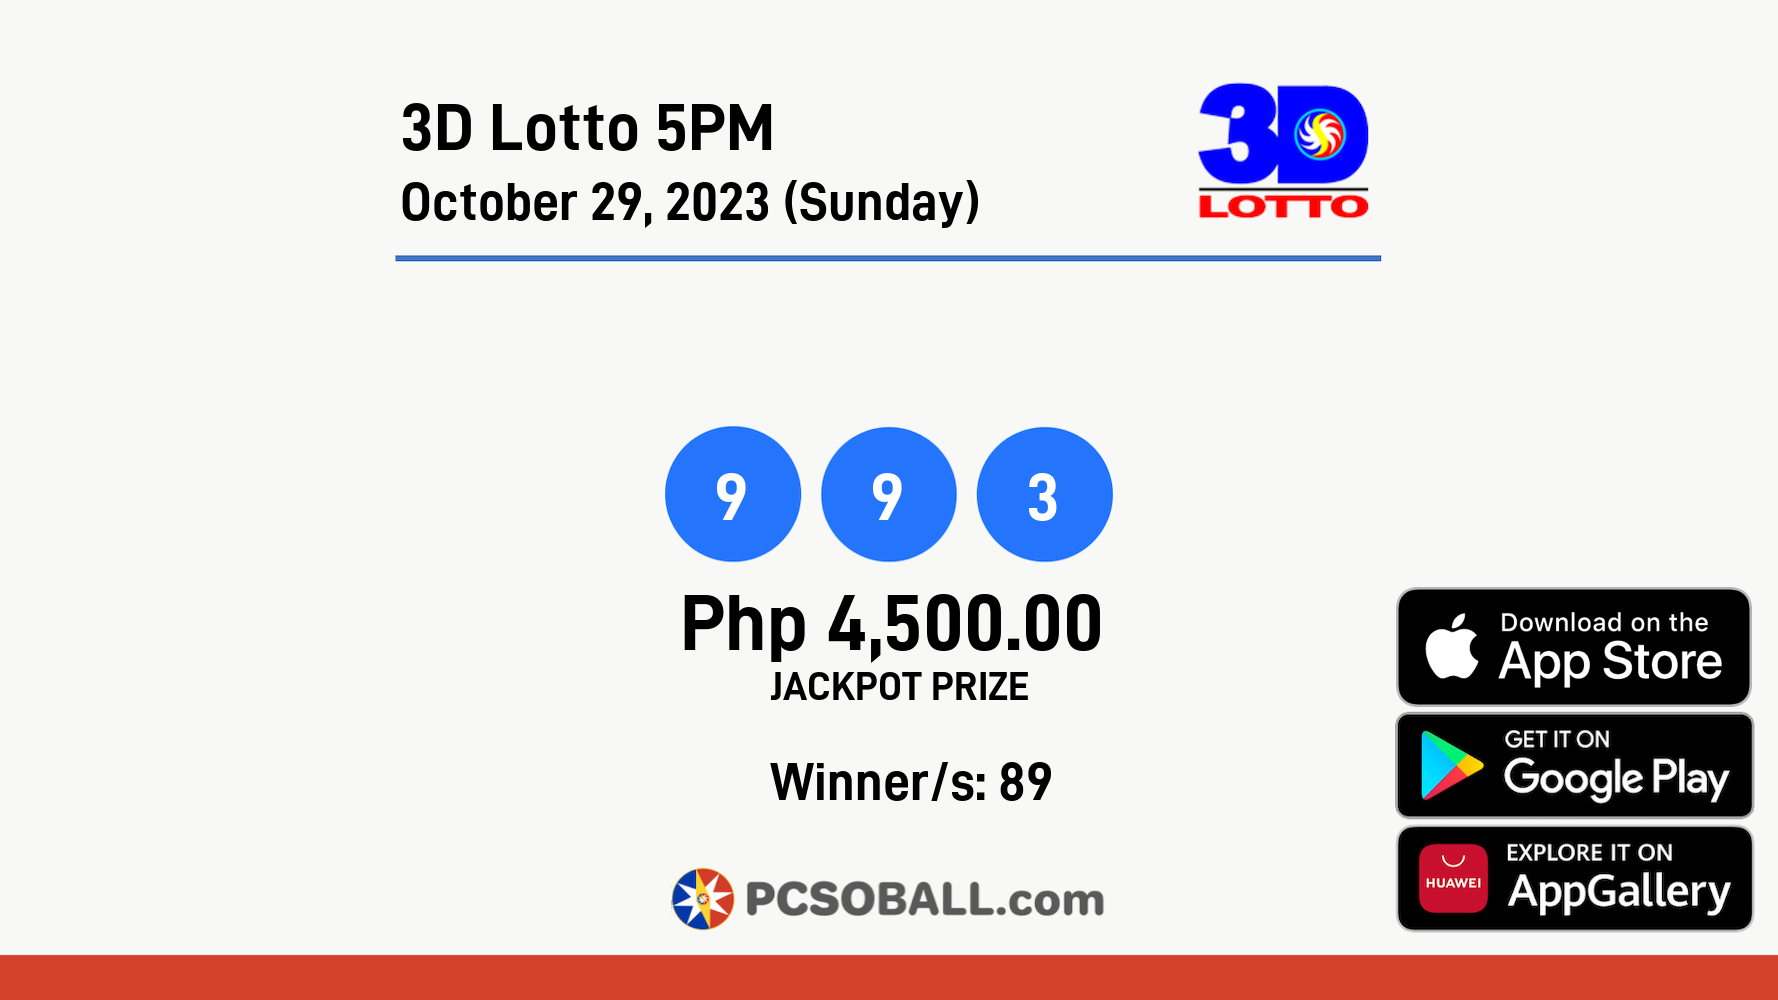 3D Lotto 5PM October 29, 2023 (Sunday) Result